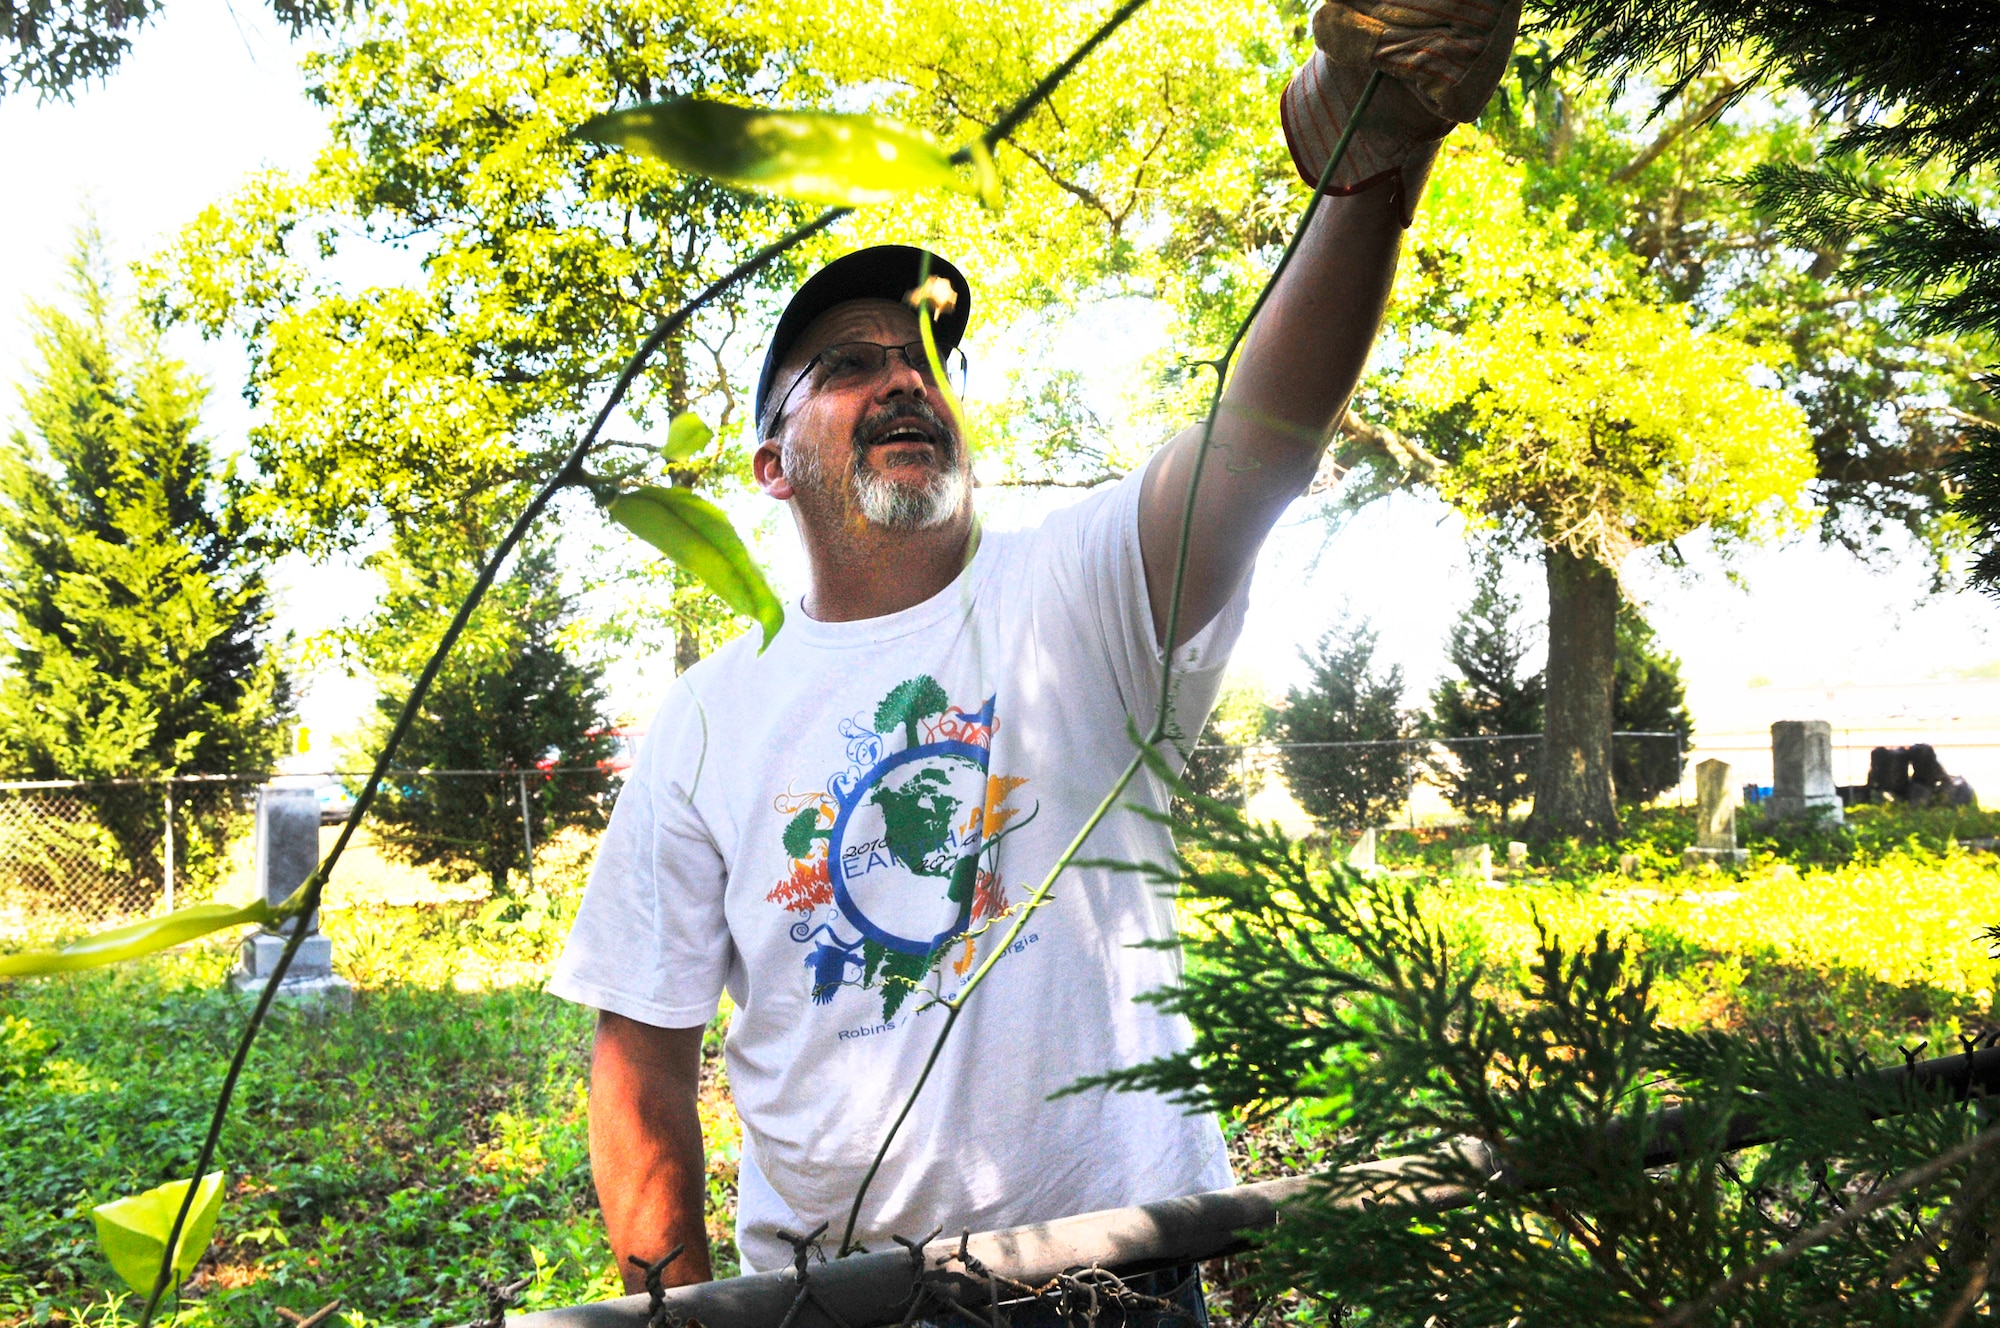 Mitch Bracewell, Air Force Reserve Command, cuts and pulls away vines during clean-up at Bryant Cemetery in Warner Robins. The clean-up is part of observance activities for Robins Earth Day. (U. S. Air Force photo by Sue Sapp)